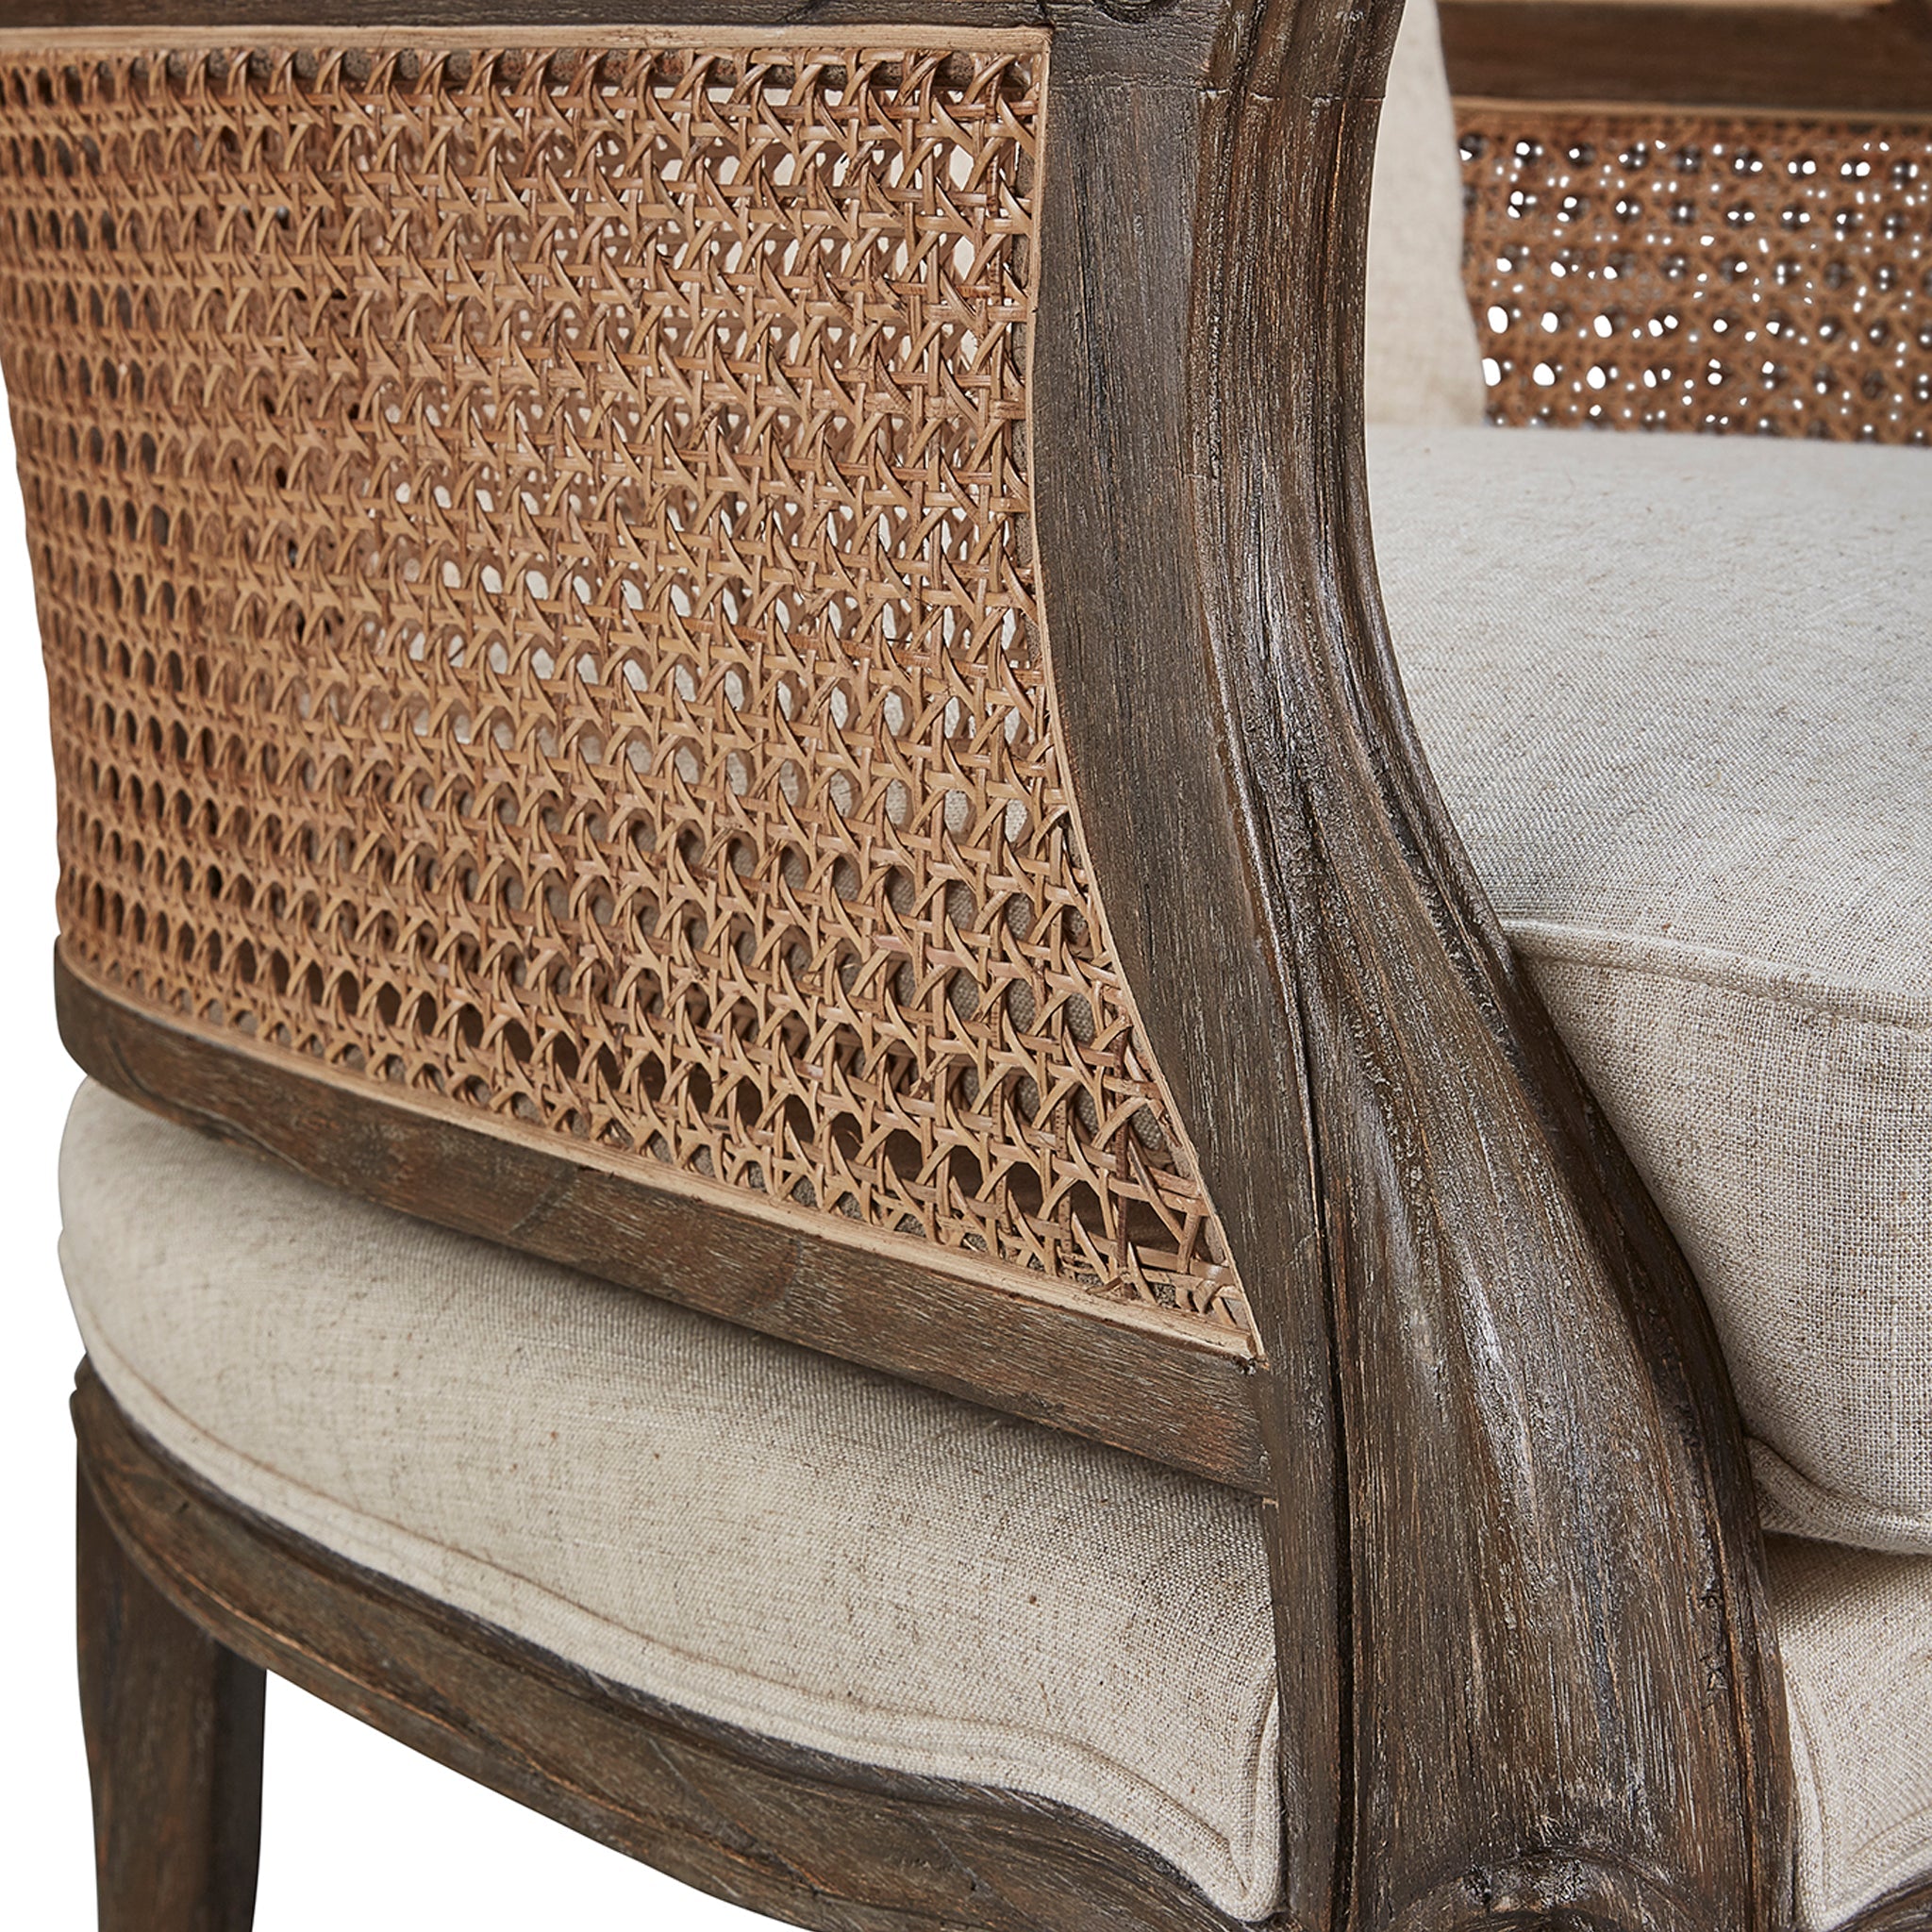 Linen and Rattan Wingback Chair